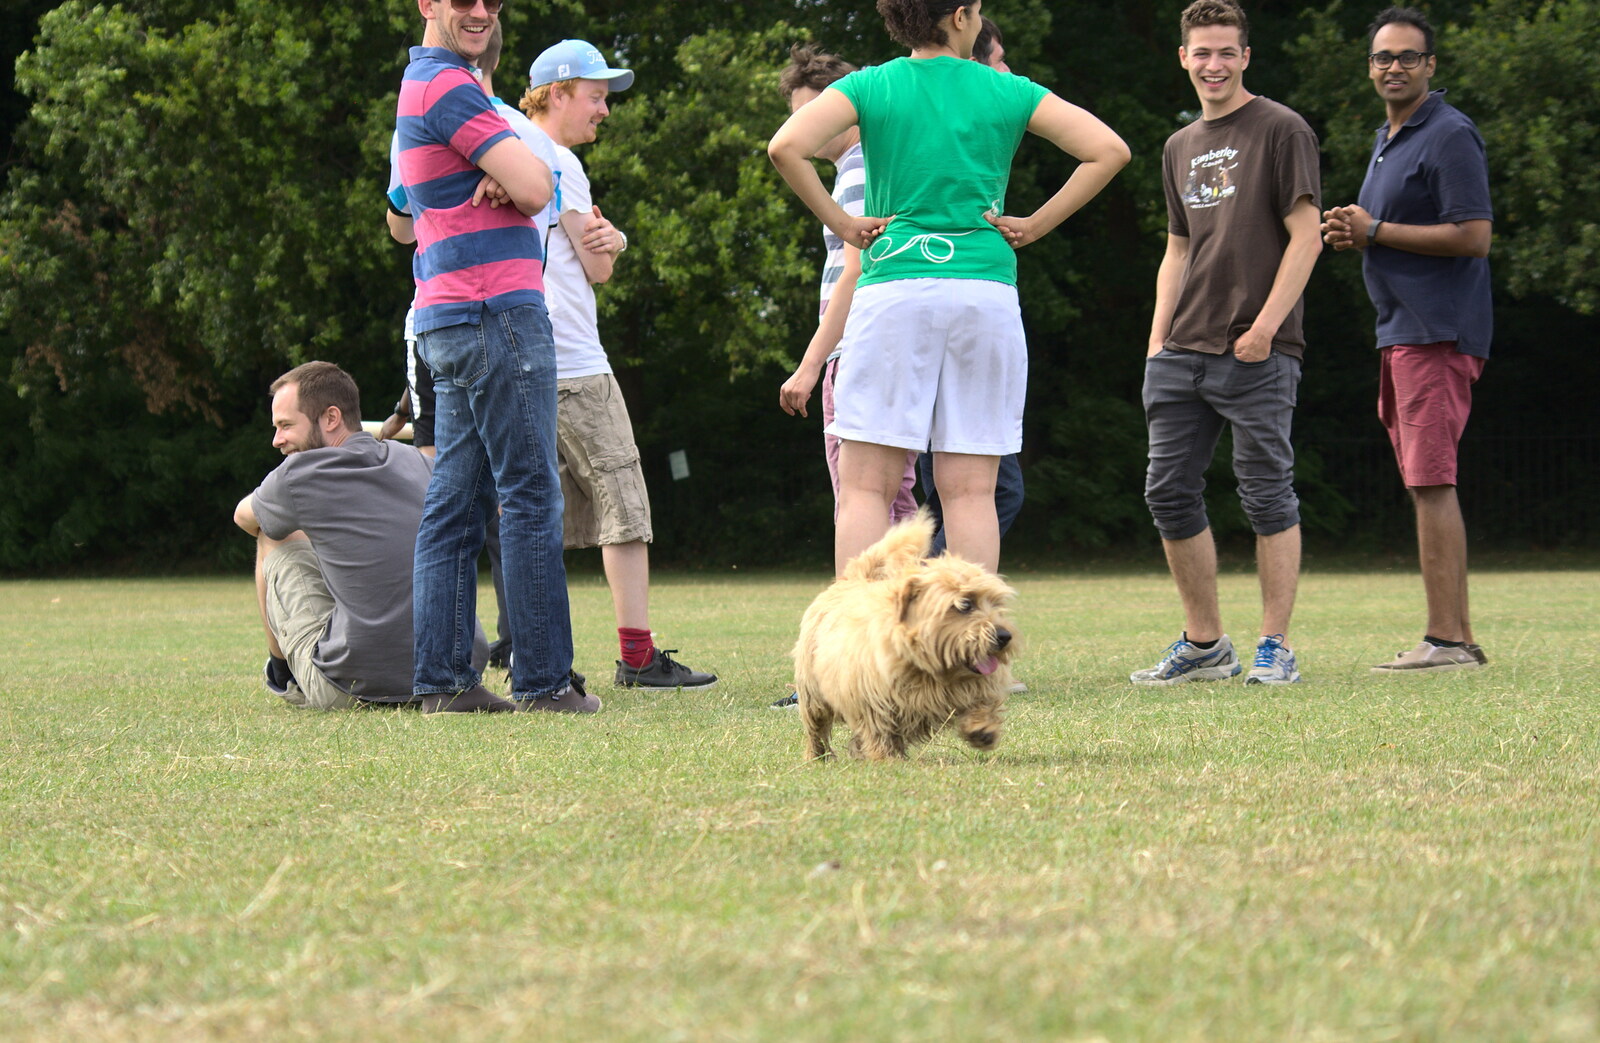 A small dog invades the group from It's a SwiftKey Knockout, Richmond Rugby Club, Richmond, Surrey - 7th July 2015